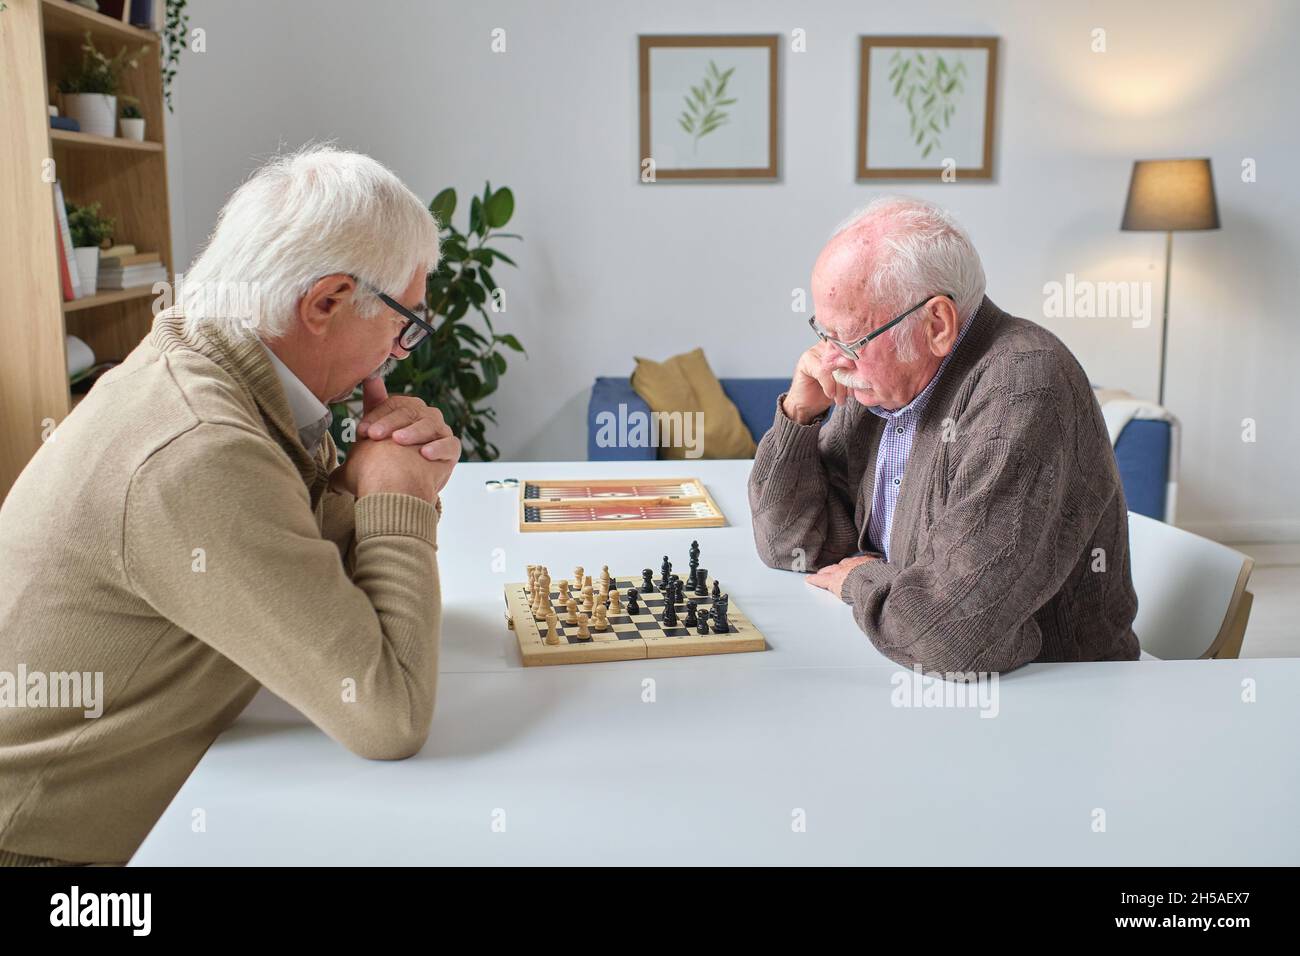 Two senior men sitting at the table and playing chess together in the room Stock Photo